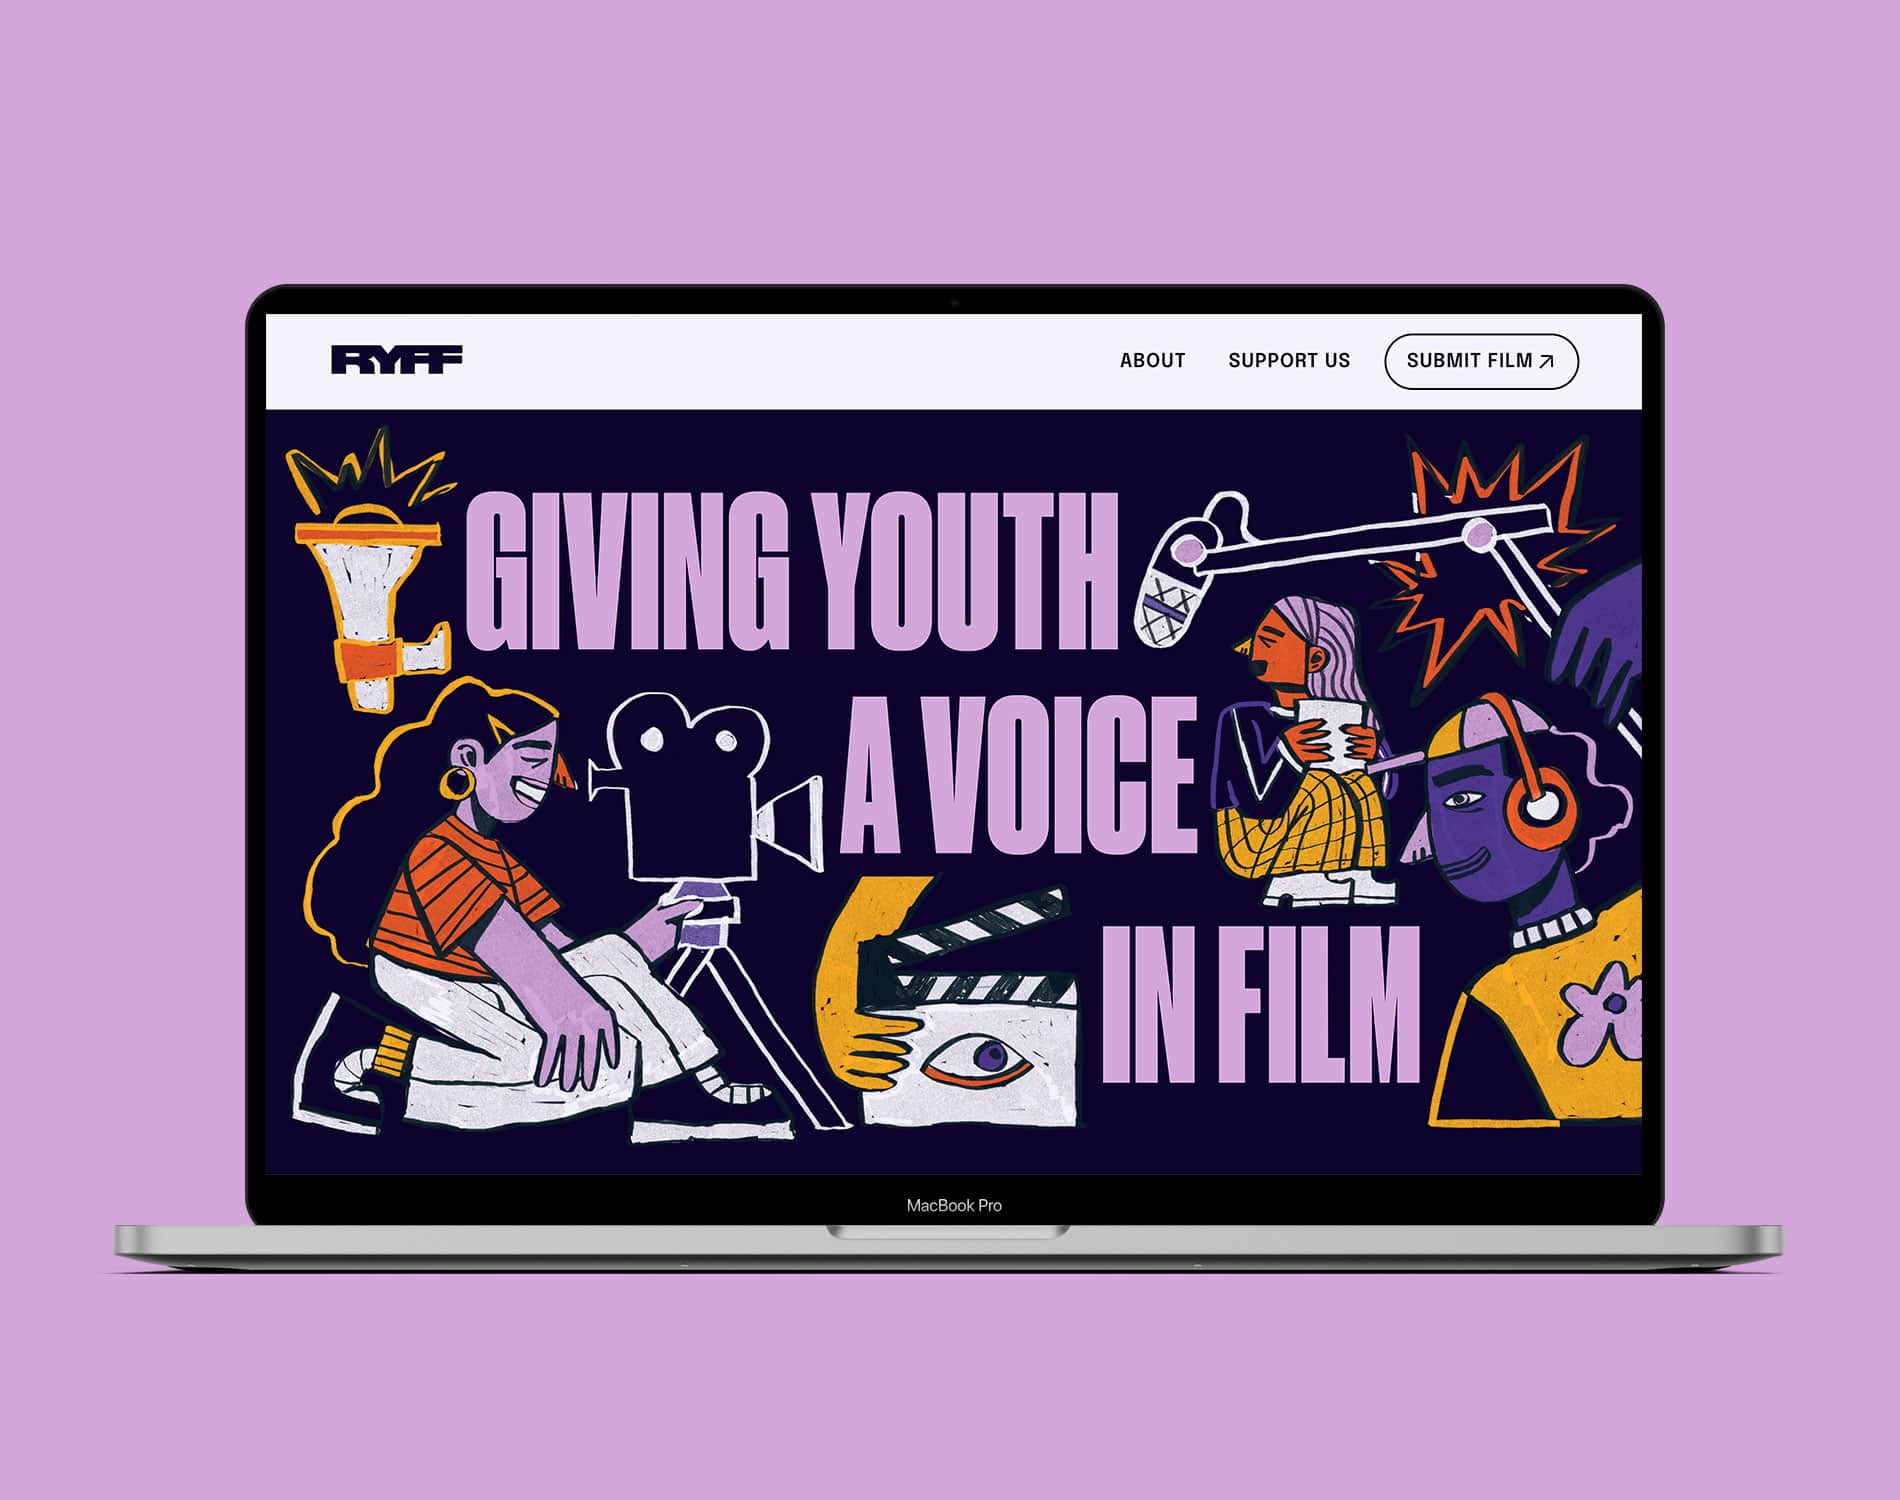 Reel Youth Film Festival website hero page laptop mockup with illustration of teenagers using film equipment and message that says Giving Youth A Voice In Film